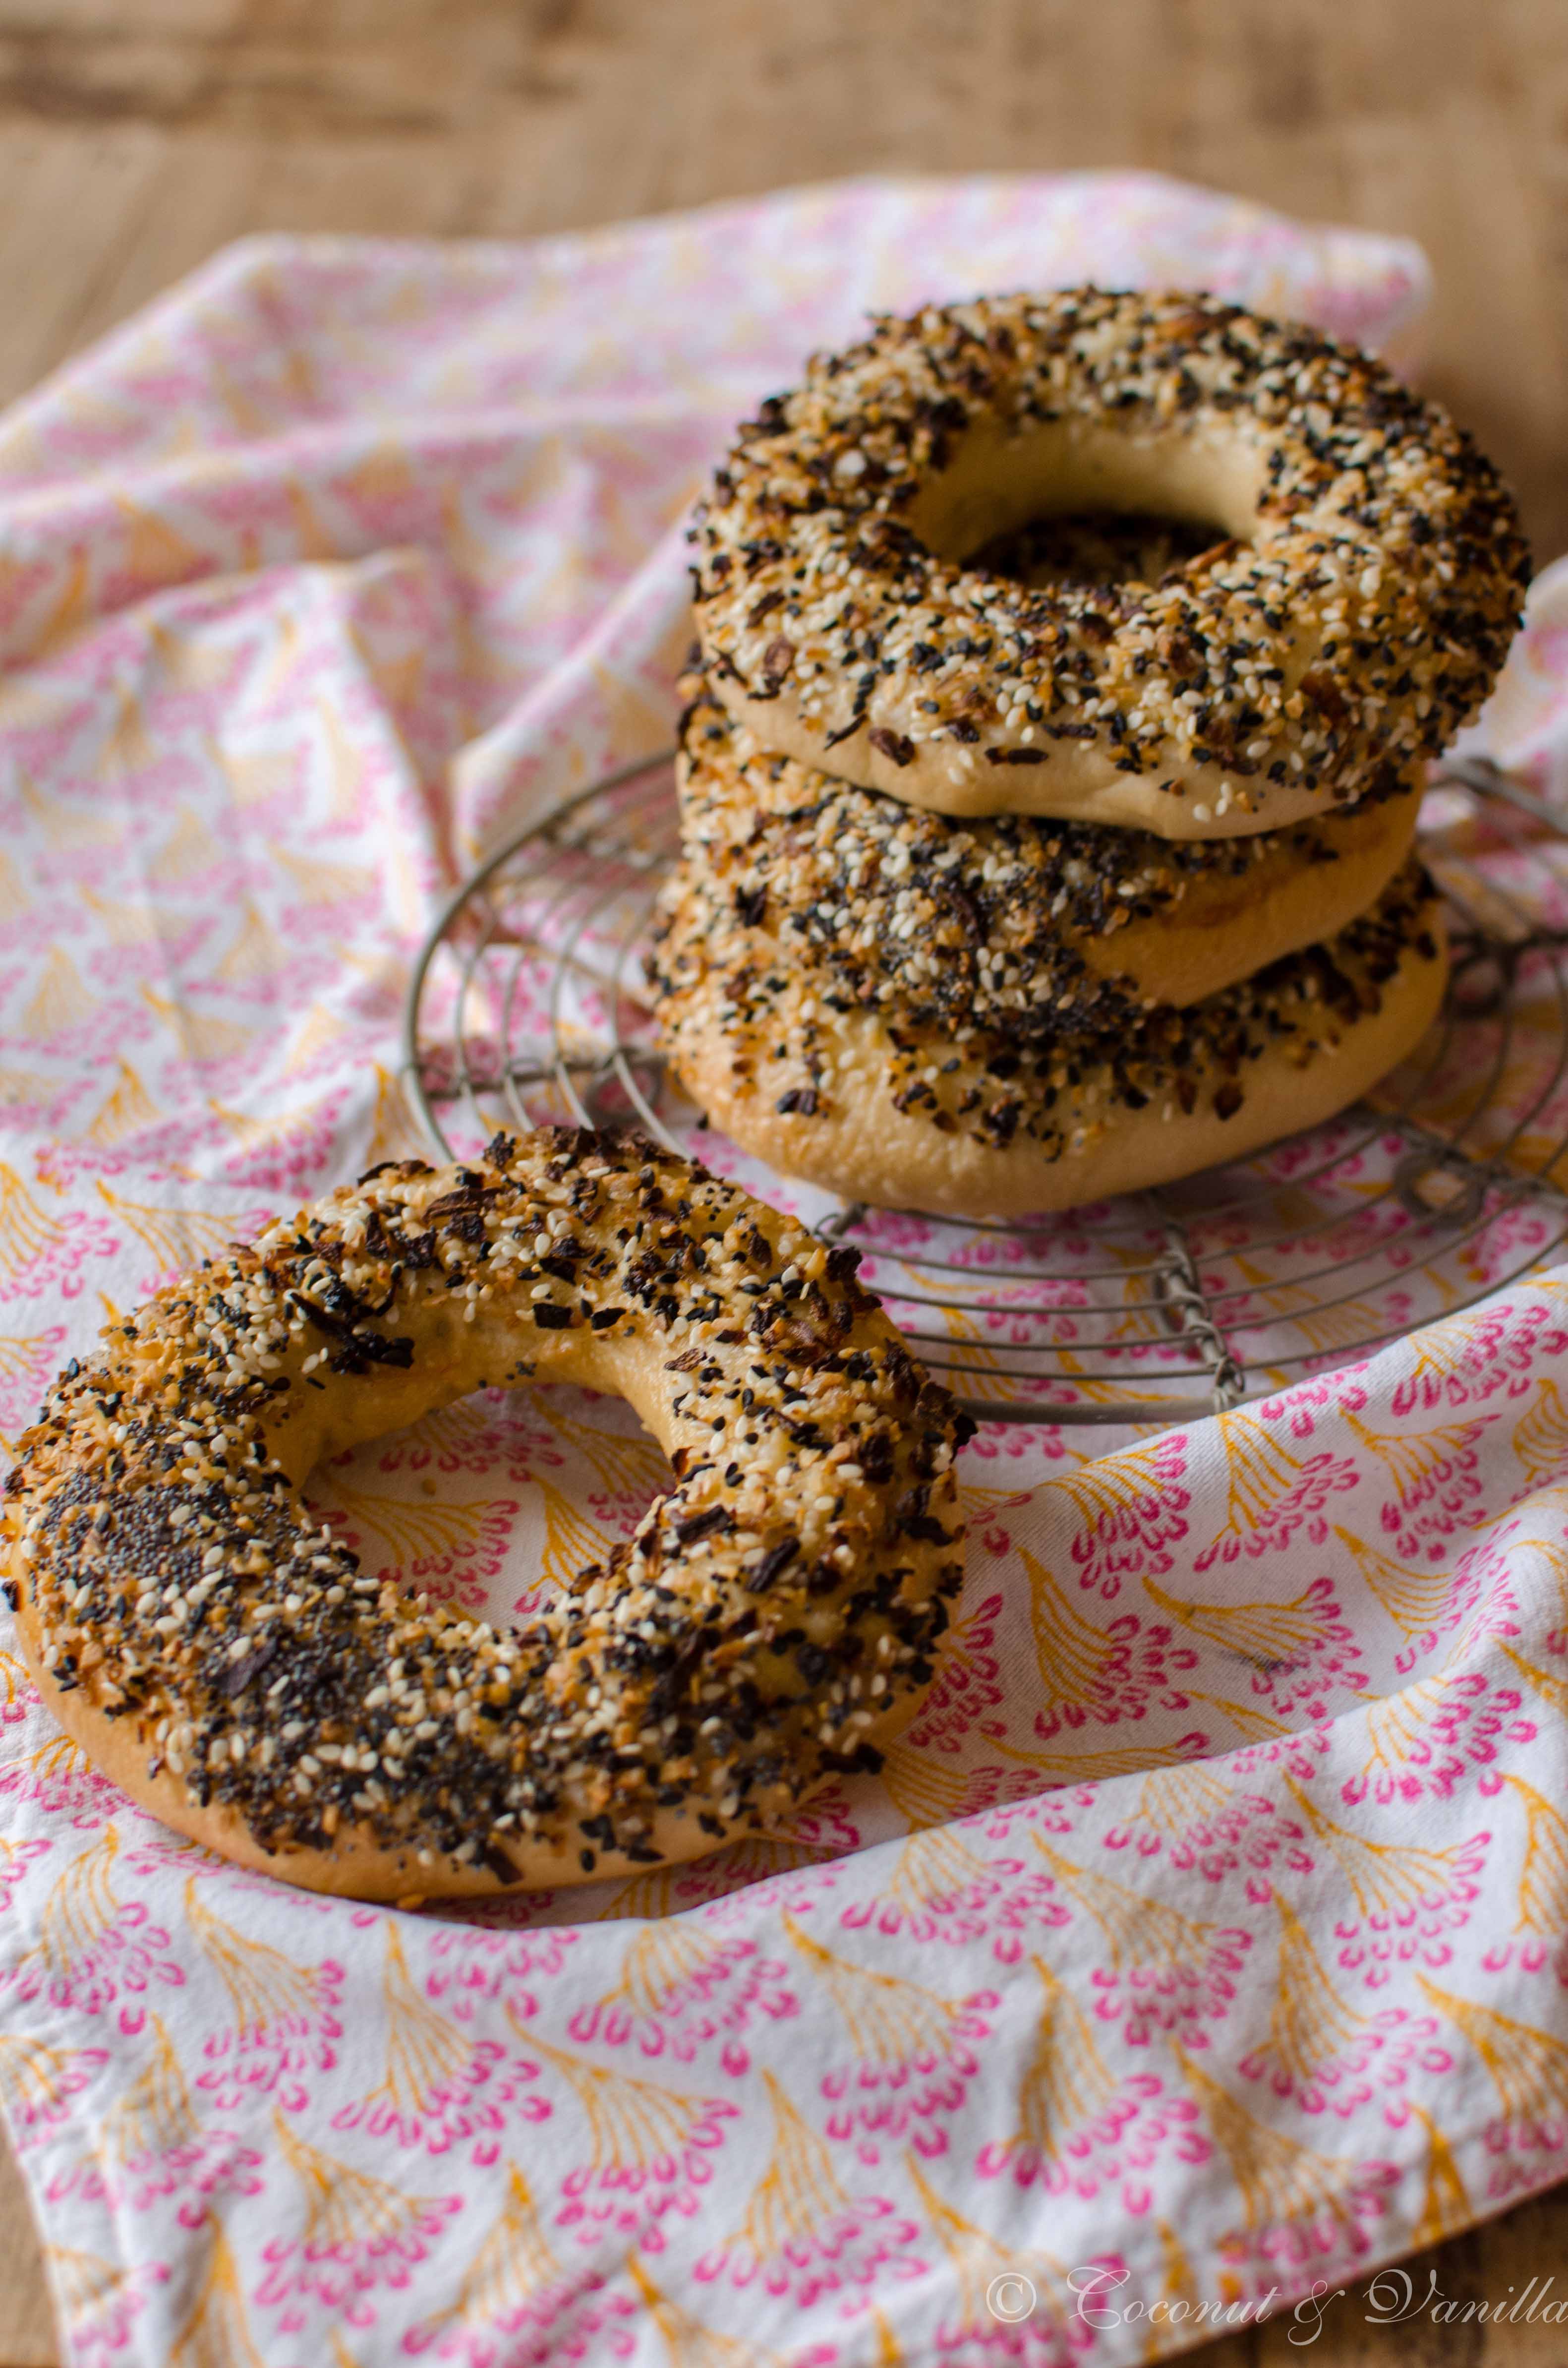 Bagel with Everything Bagel Spice by Coconut & Vanilla